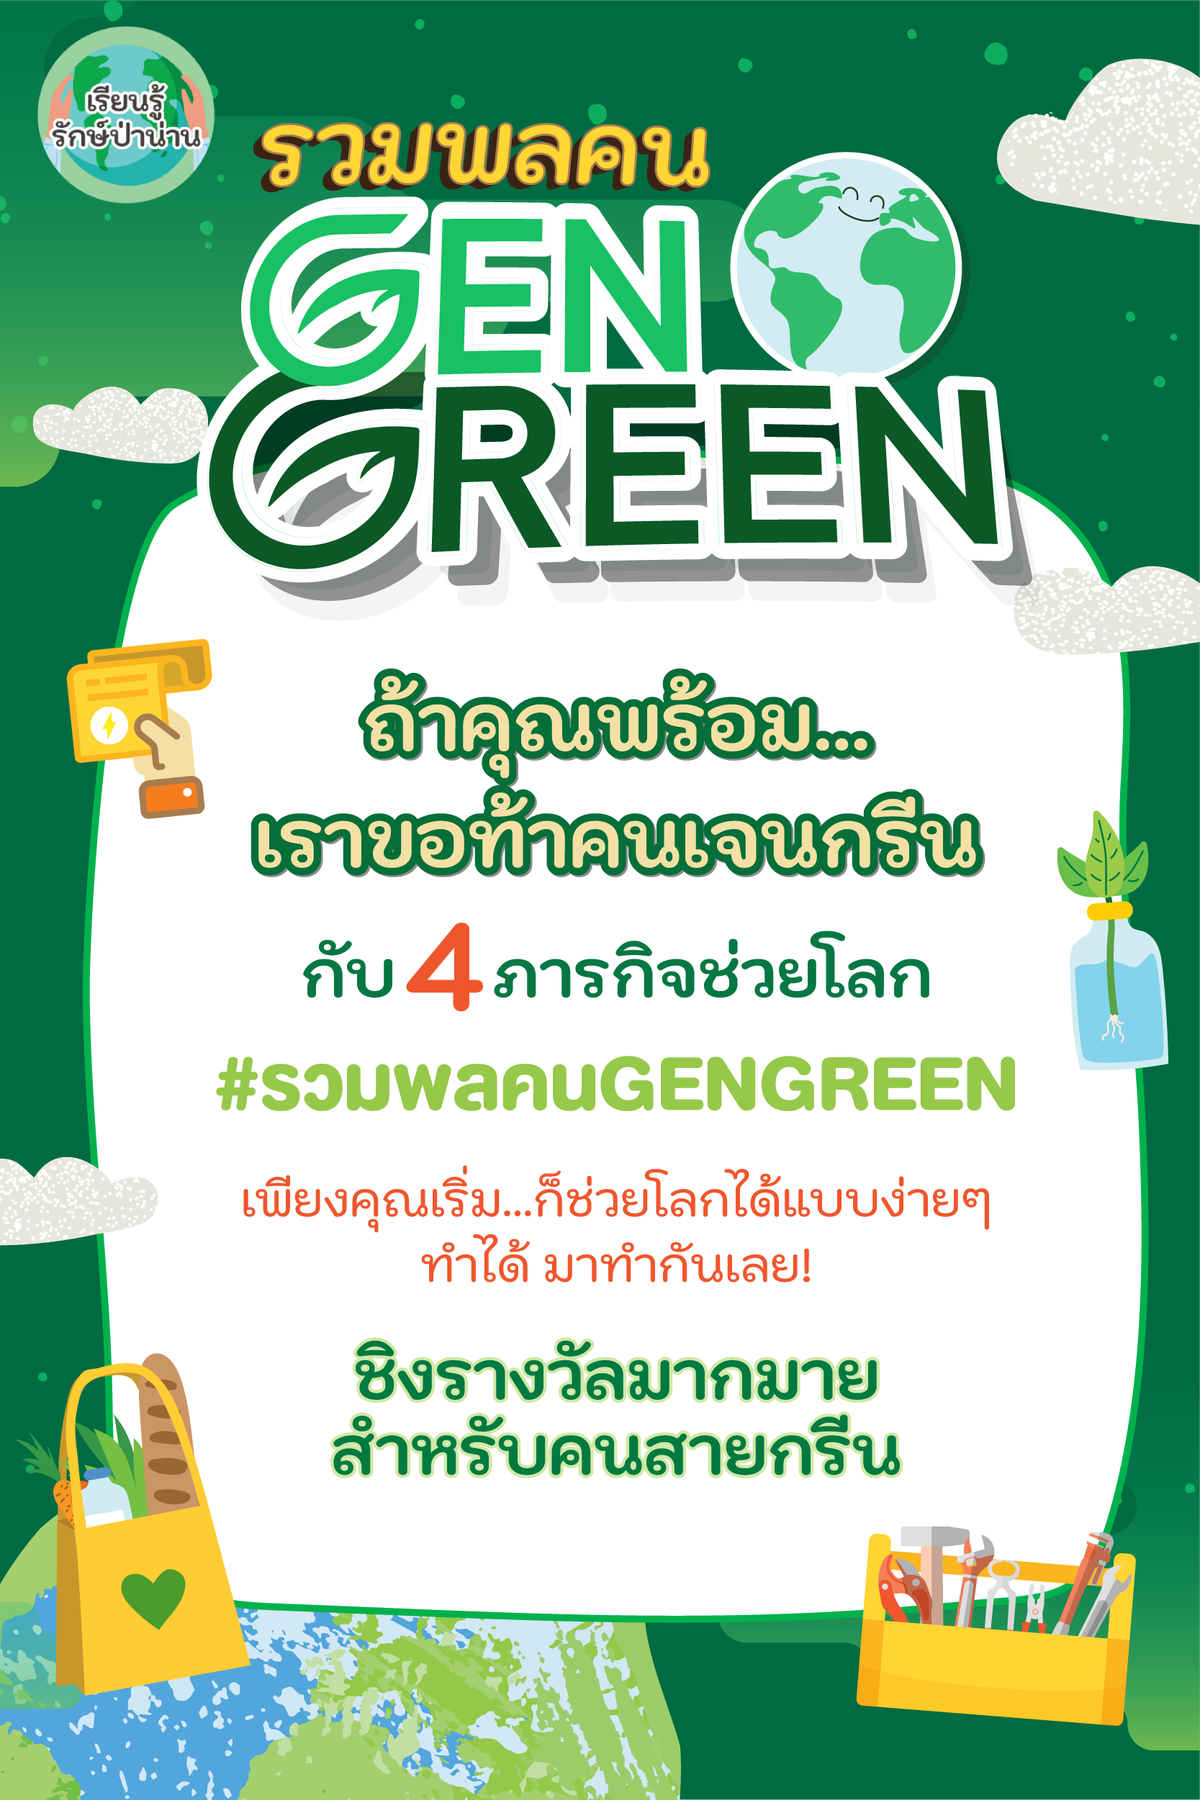 How to Love the Planet Like a Pro! Nan Sandbox project launches a campaign to promote '8R' in a drive to fight climate all Thais are encouraged to join 'GENGREEN Gathering'